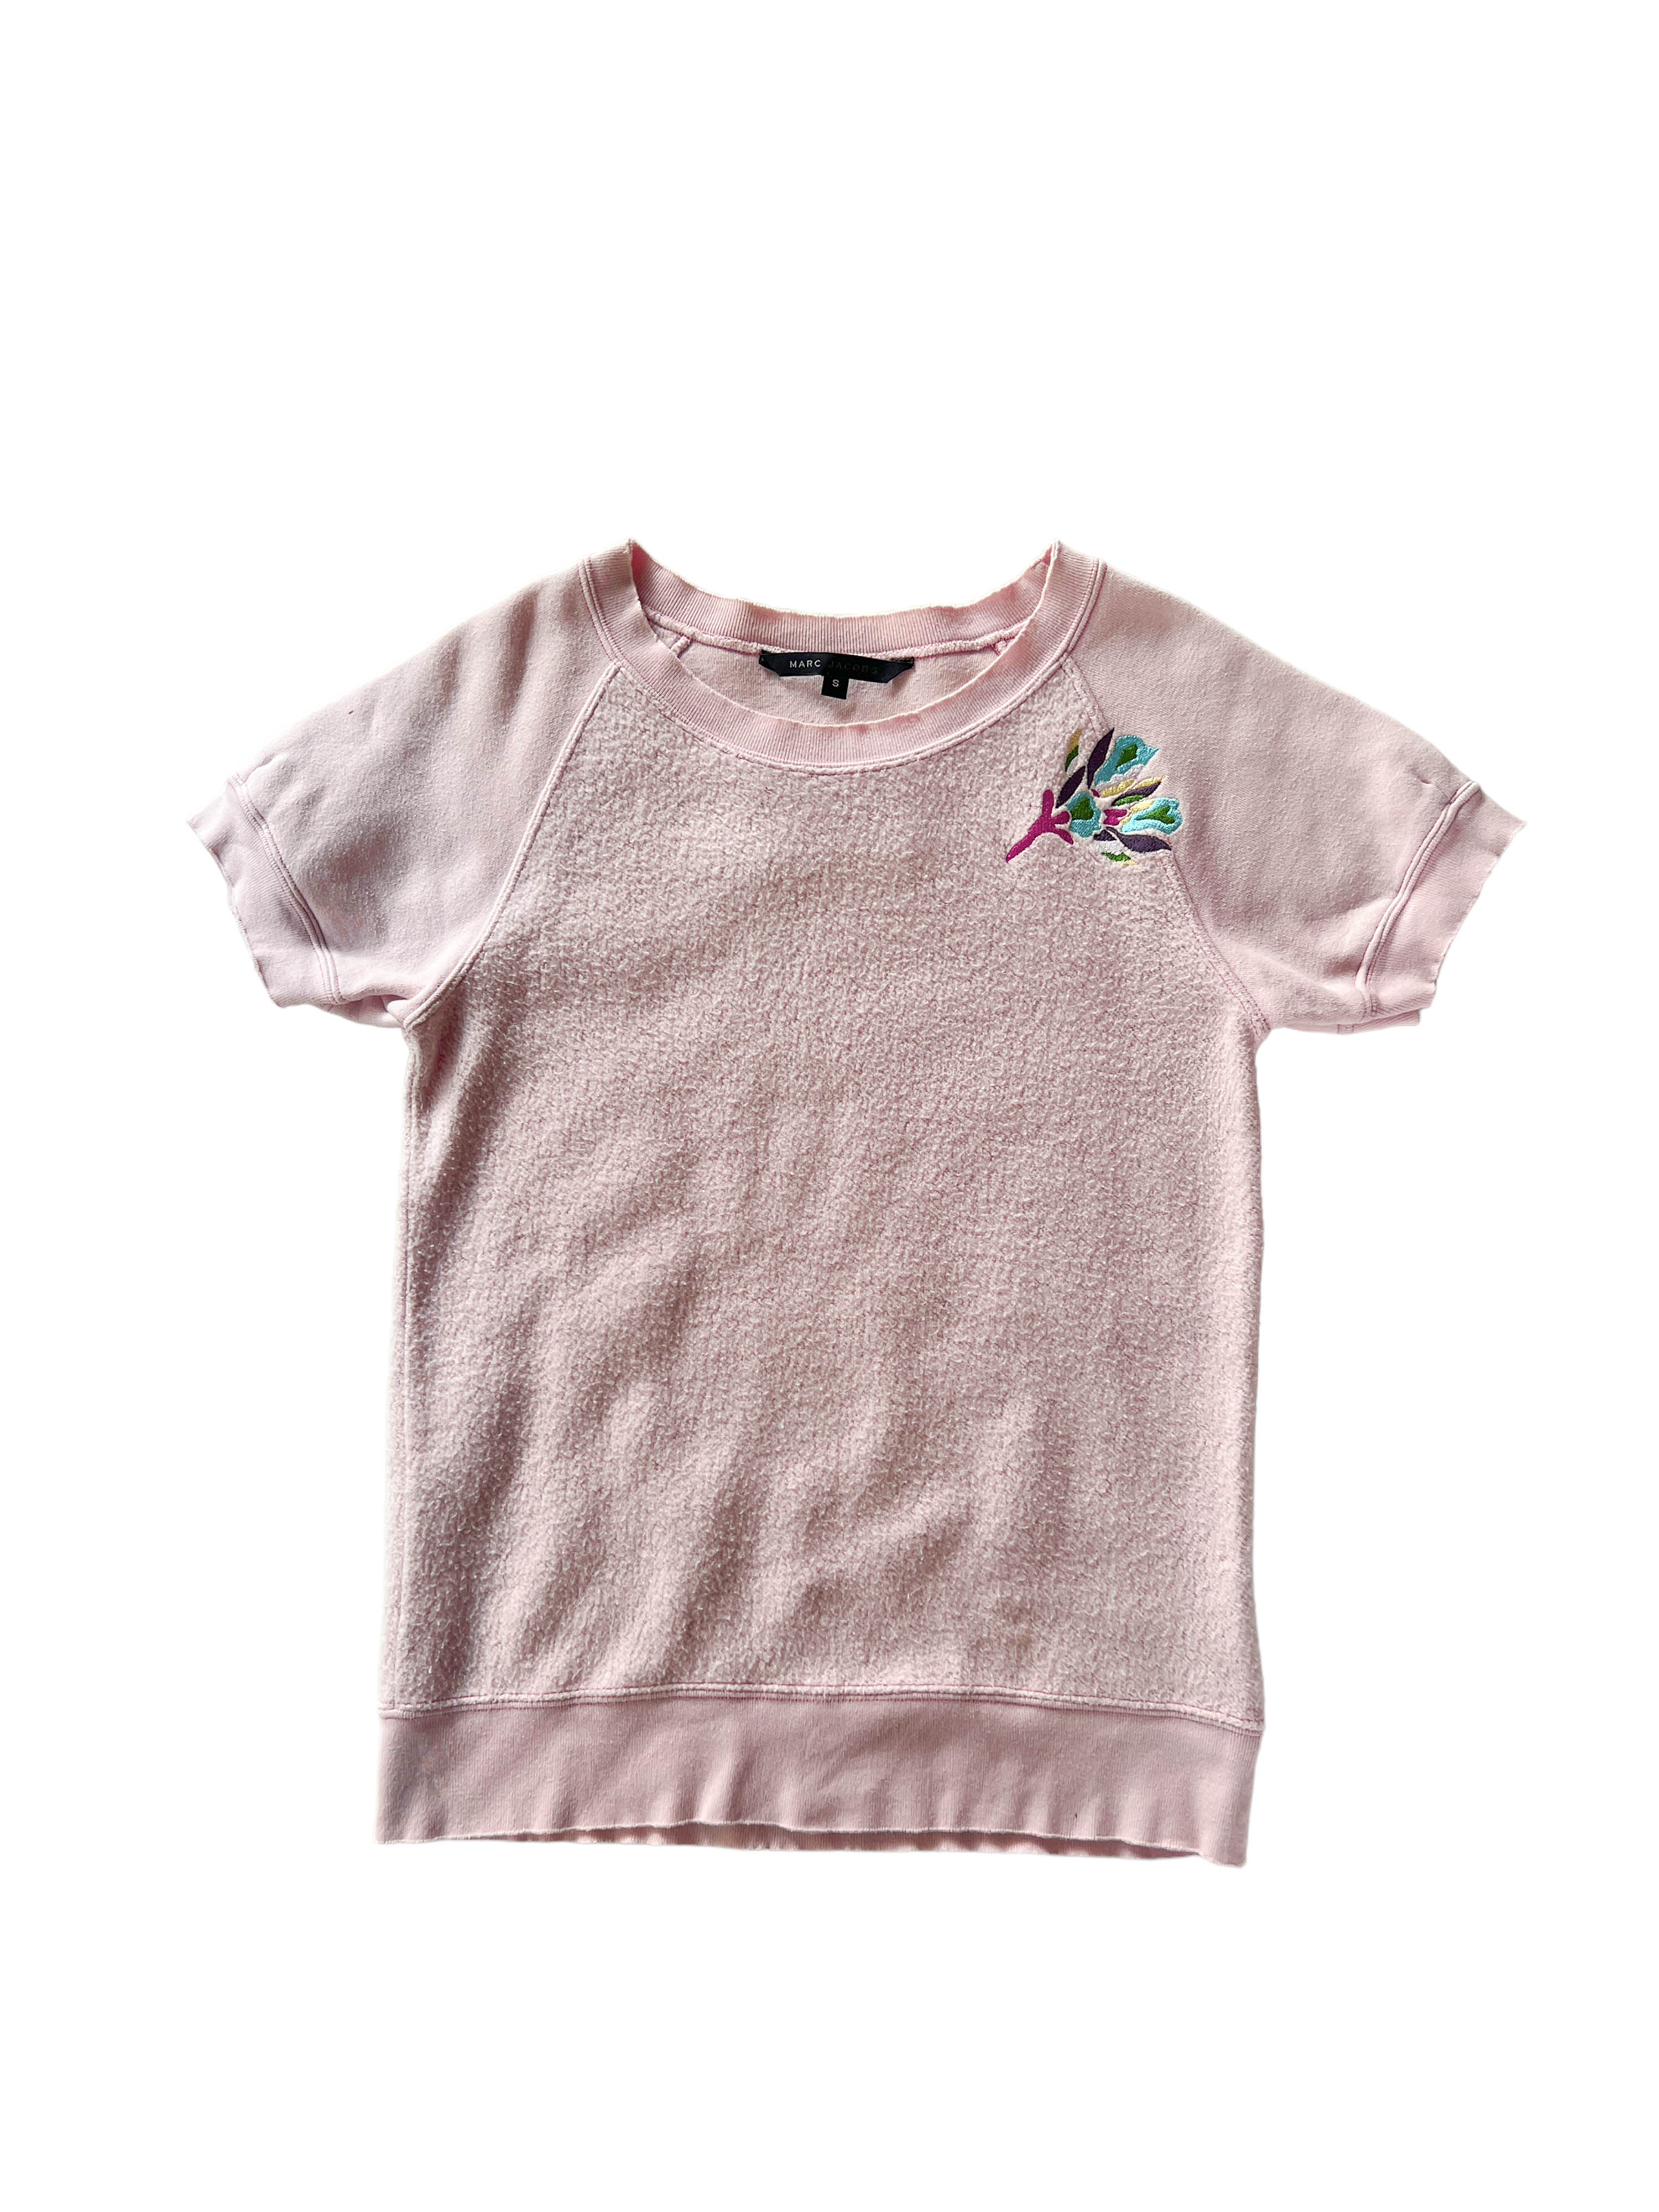 MARC JACOBS pink t-shirts